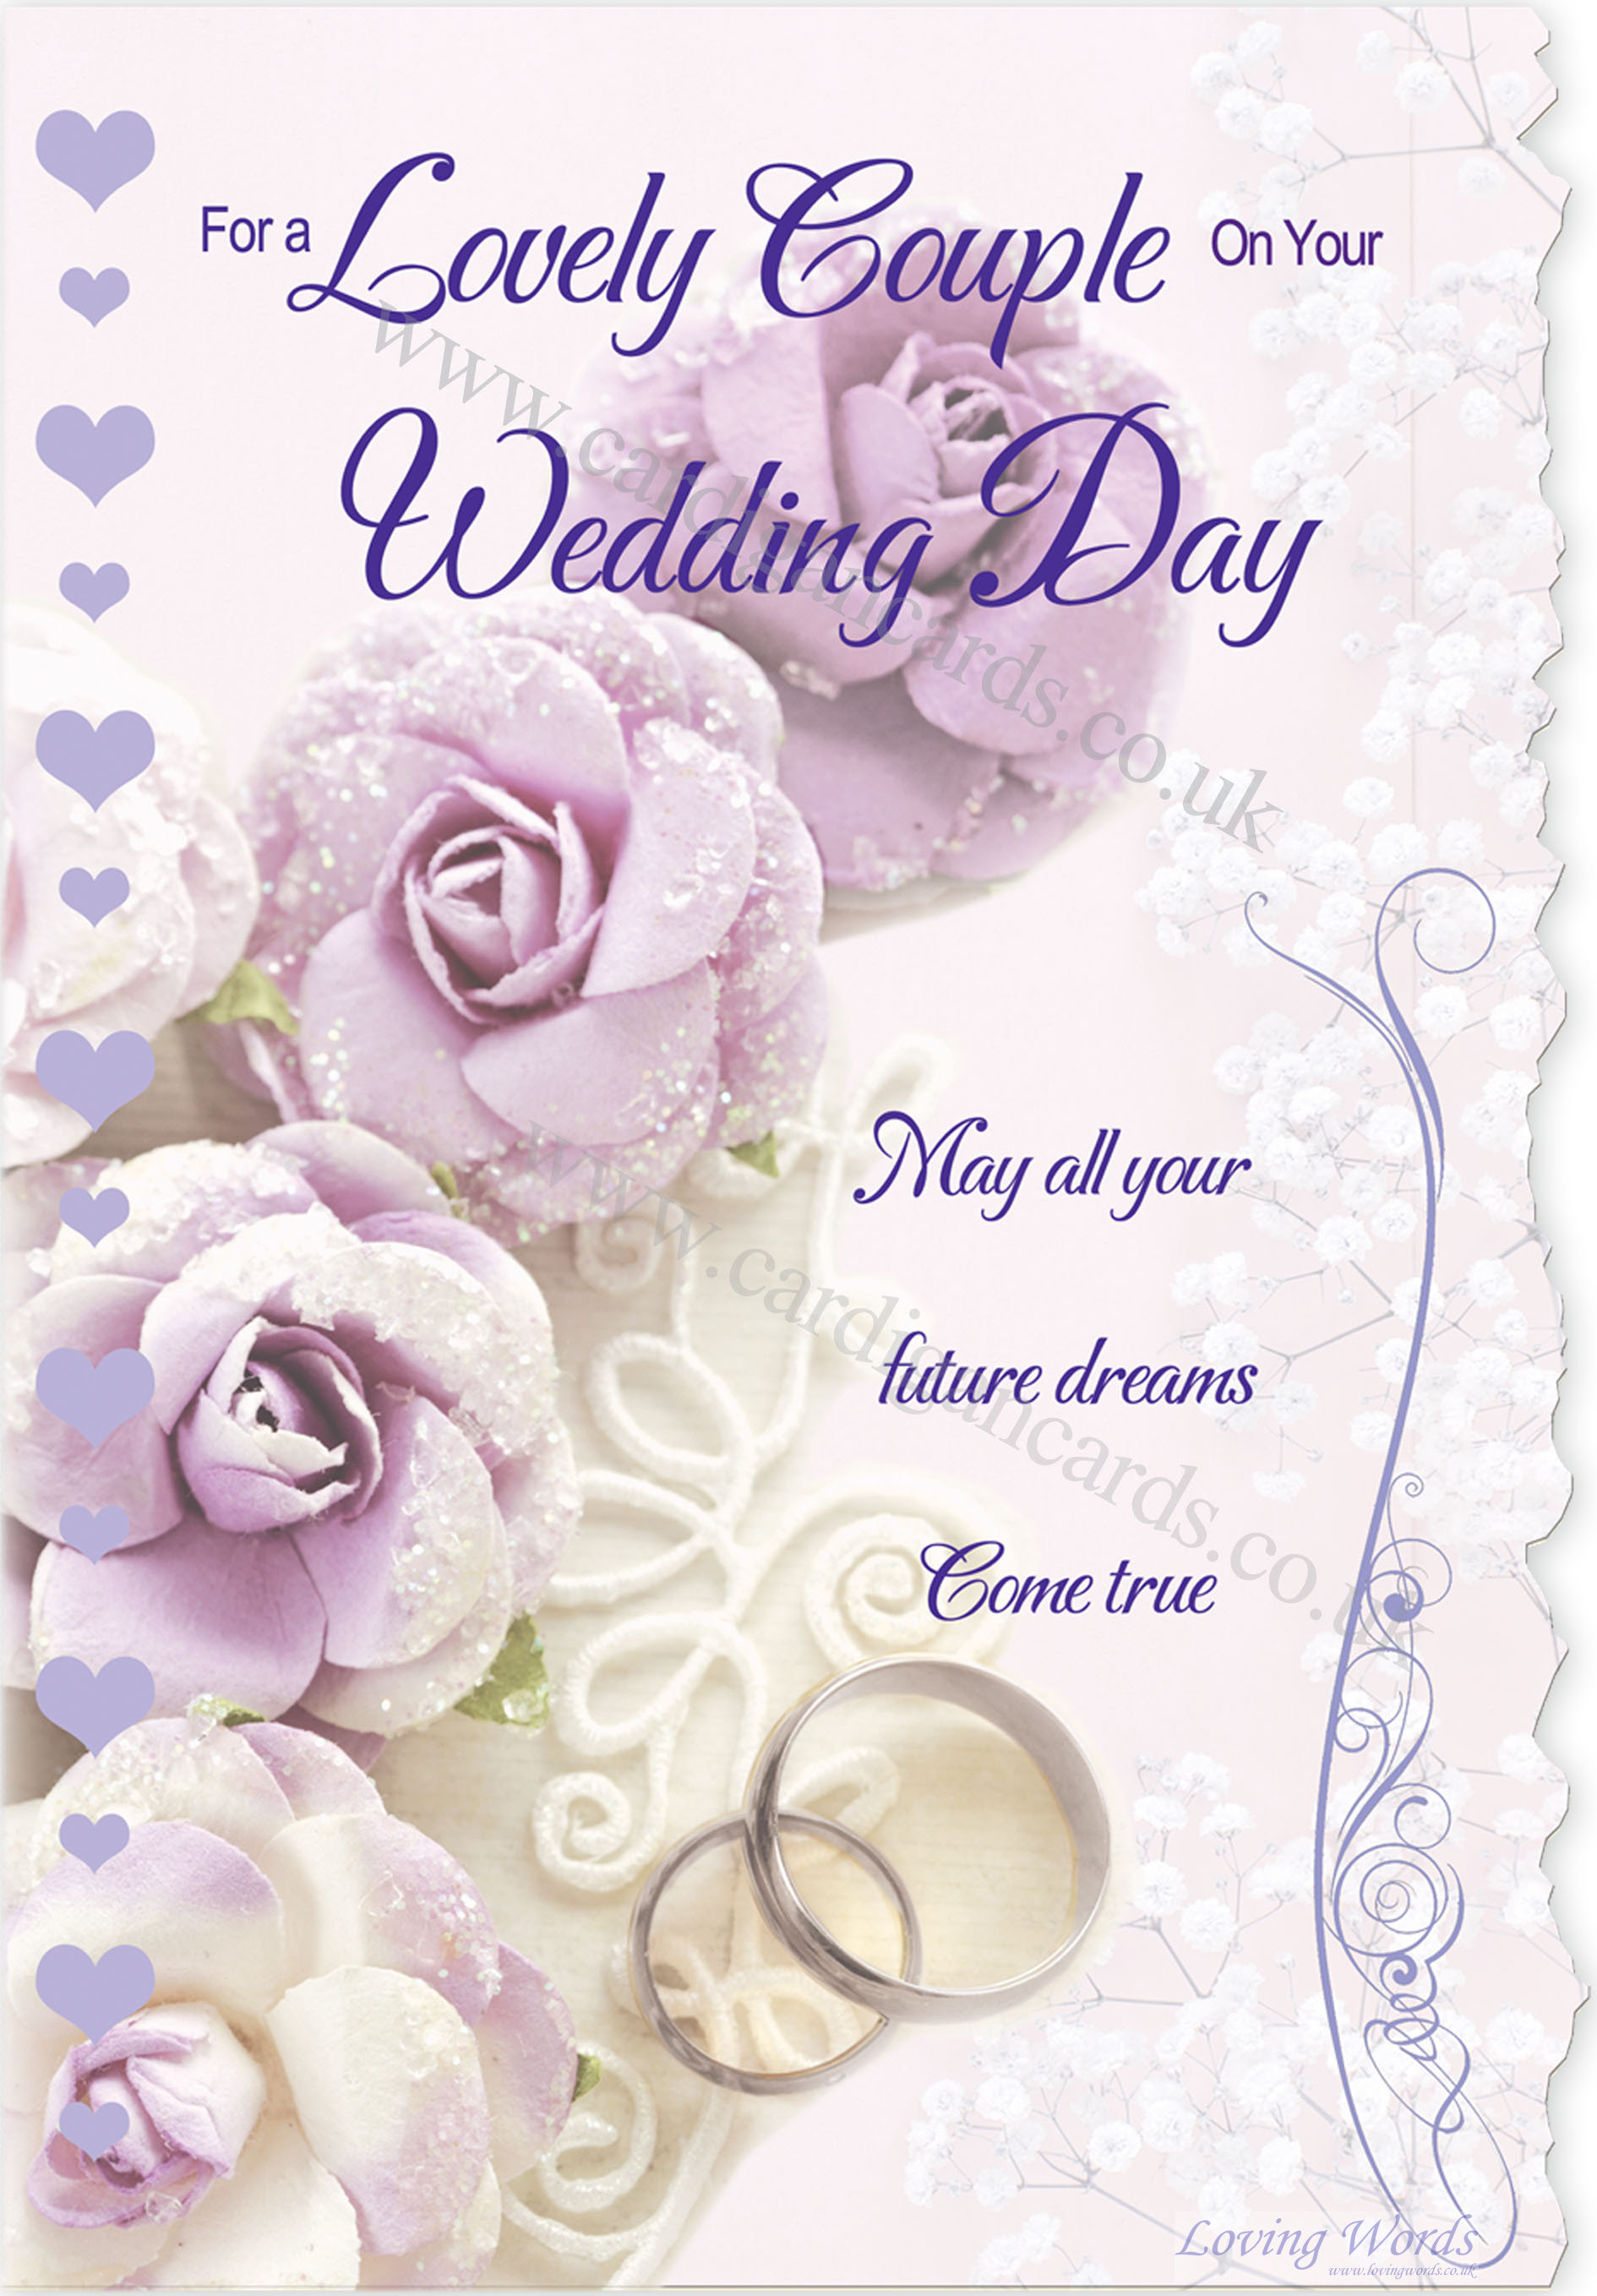 Lovely Couple Wedding | Greeting Cards by Loving Words